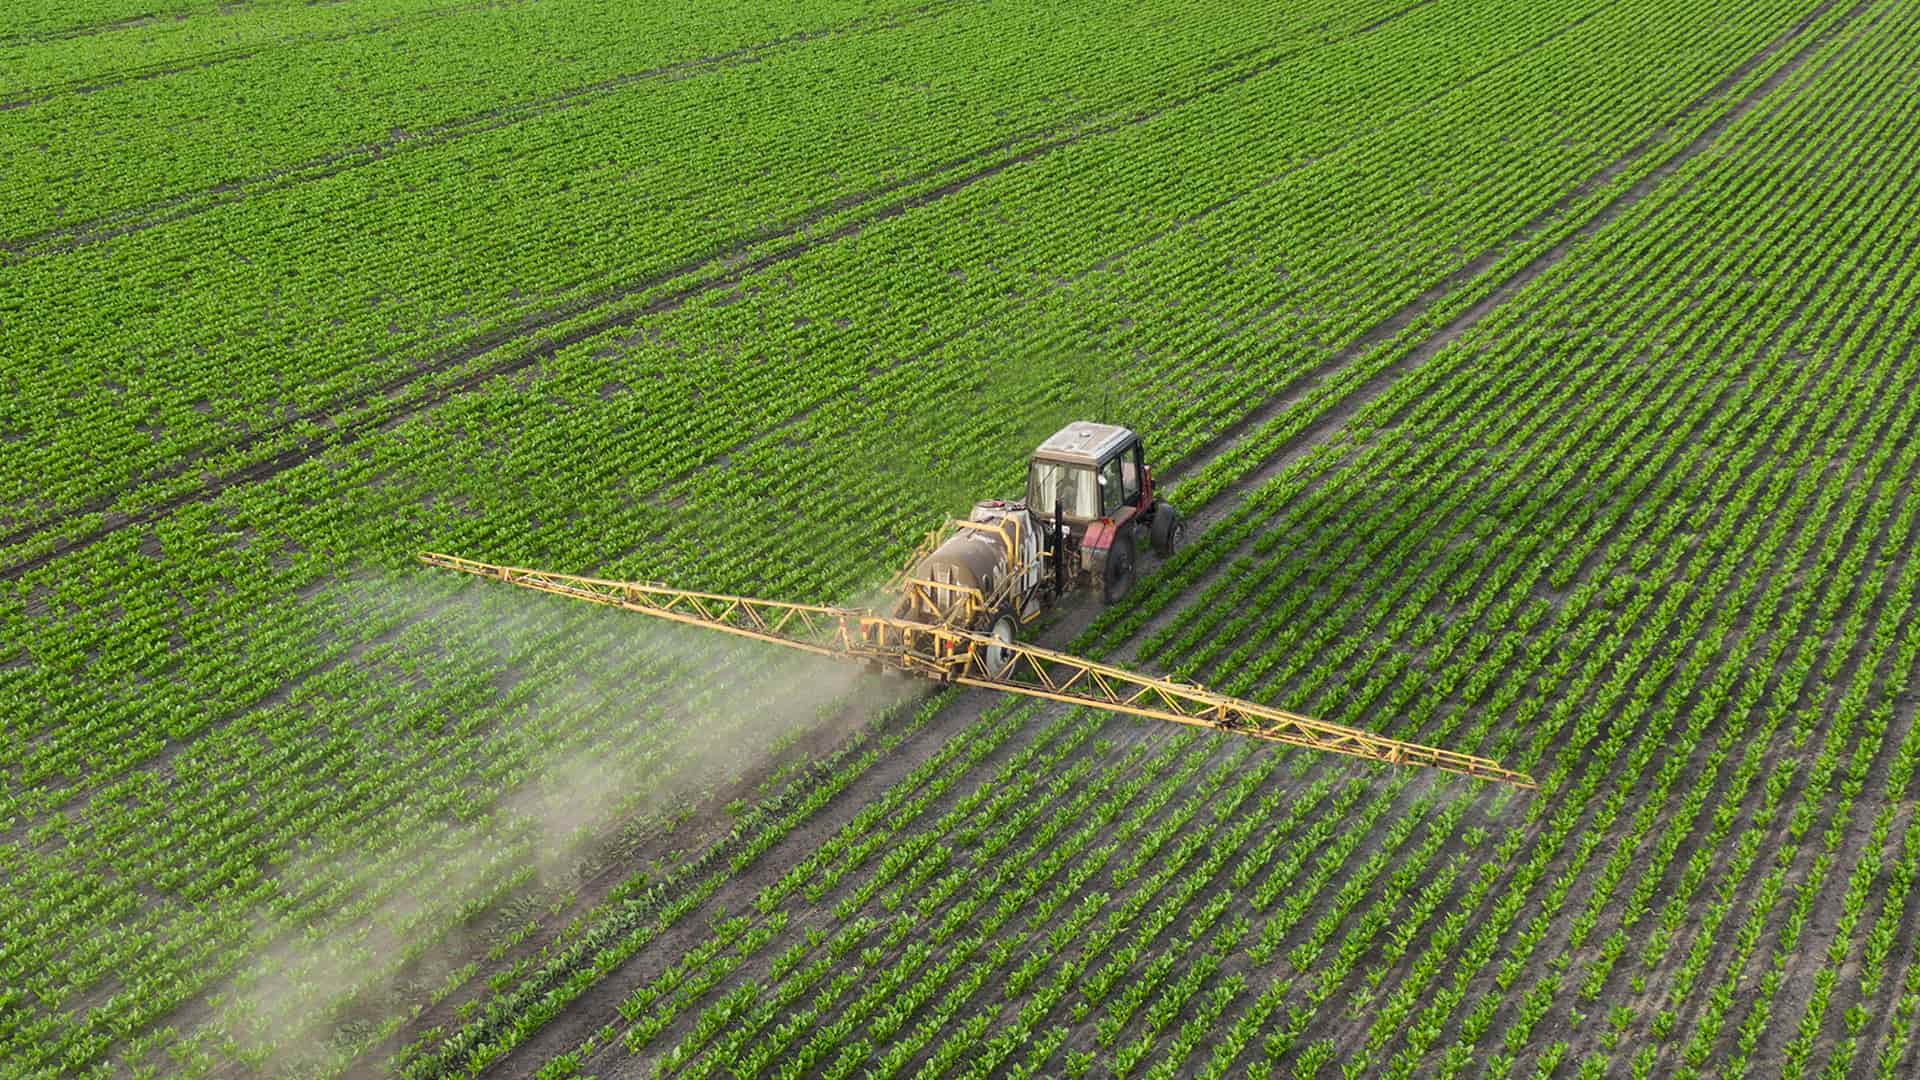 Generate tramline on the current guidance line to create parallel tracks with unplanted spaces for spraying operations.  